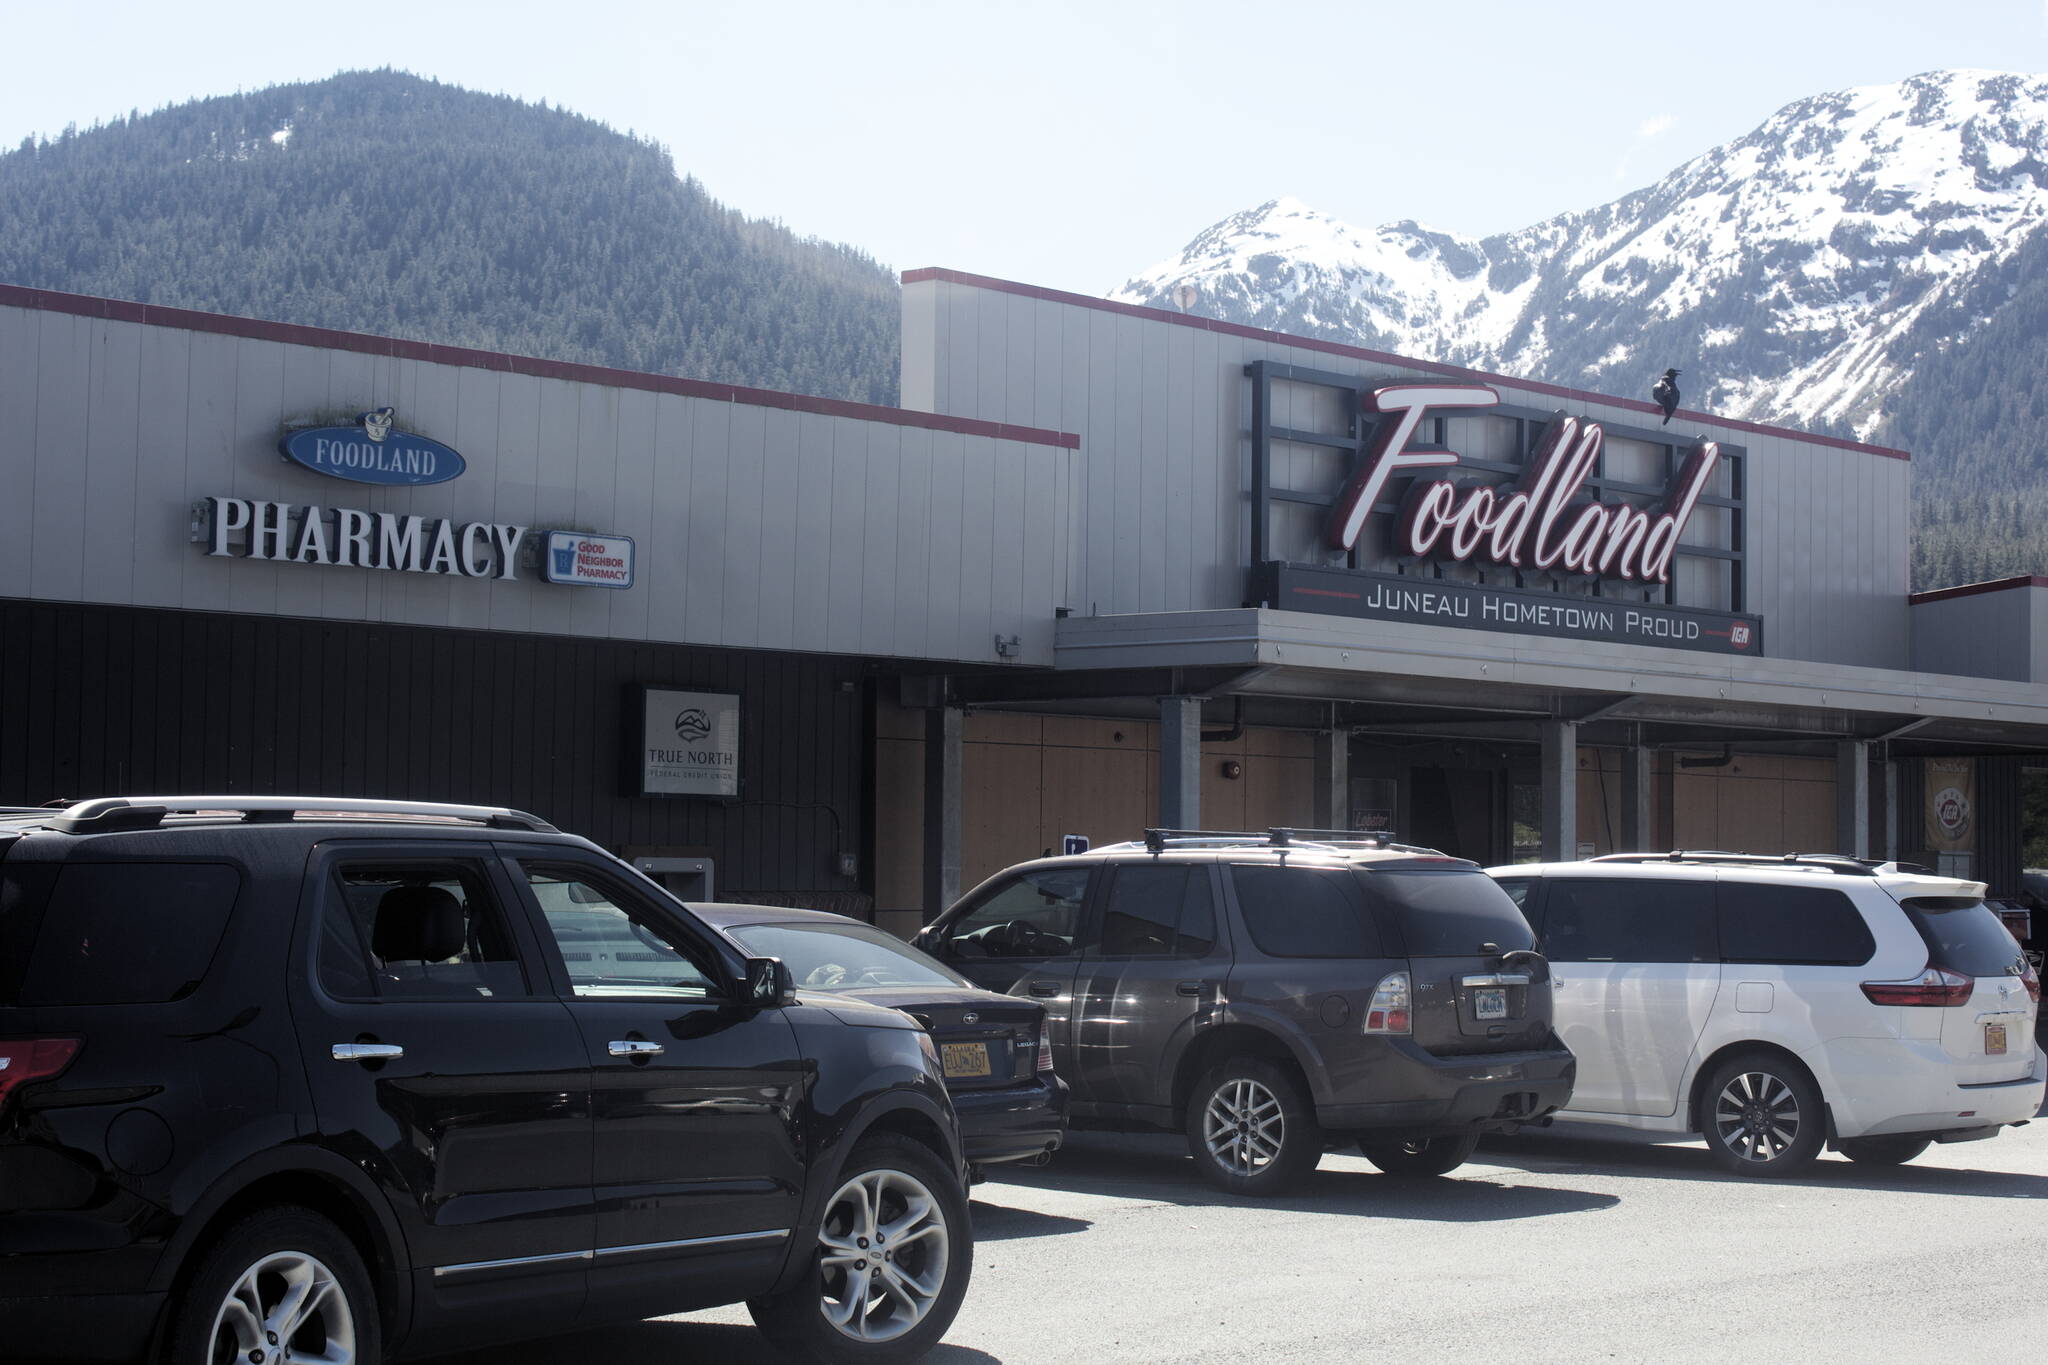 A pharmacy sign outside the Foodland IGA will soon disappear as the pharmacy inside is closing as of Wednesday, June 1, due to the inability to hire a new pharmacist. (Mark Sabbatini / Juneau Empire)